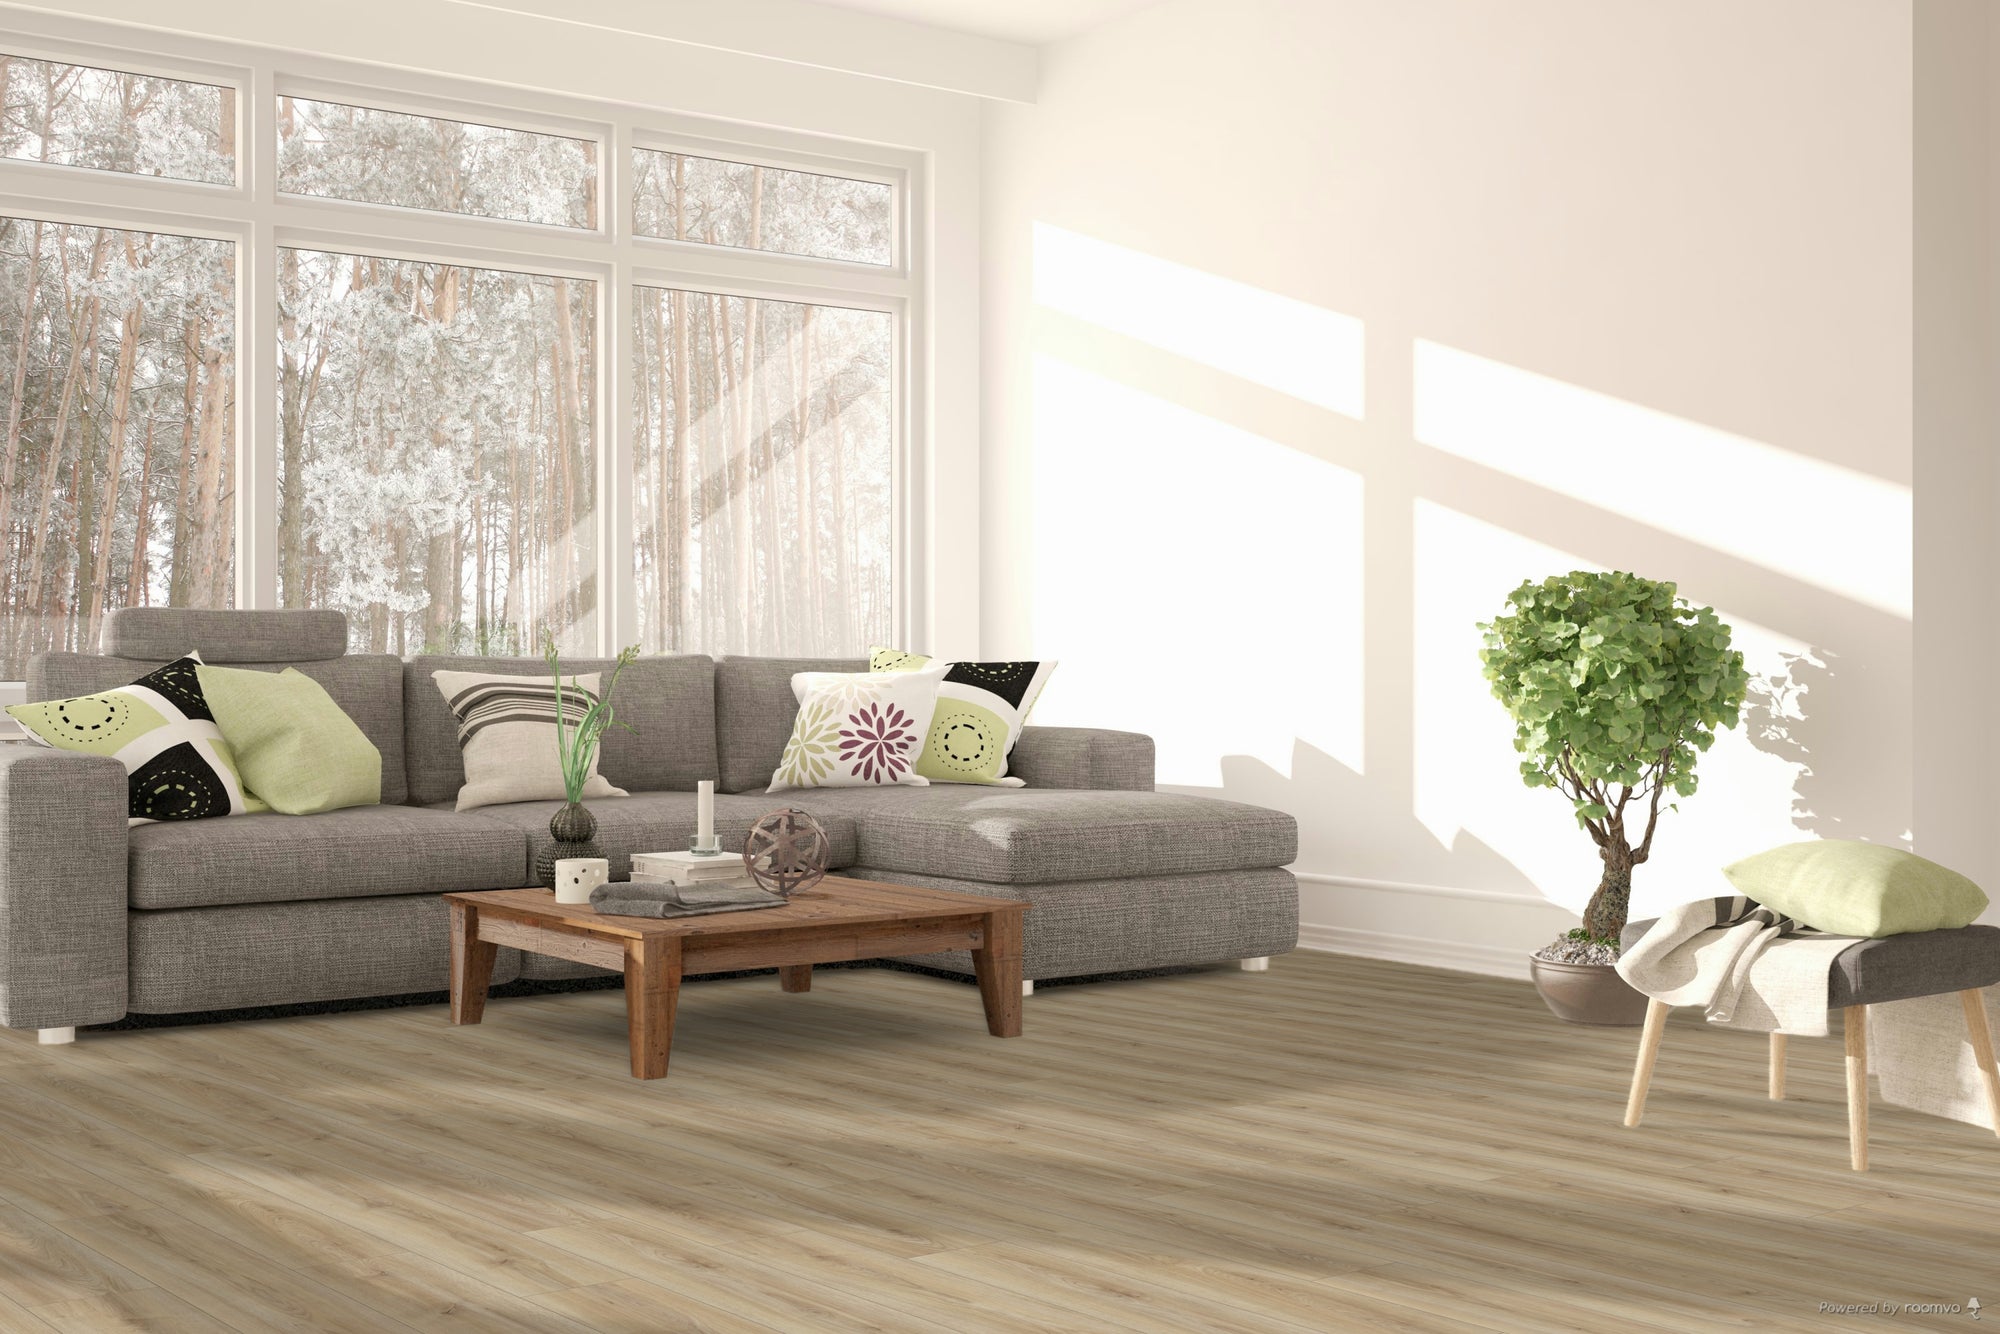 Engineered Floors - Wood Tech Collection - 7 in. x 54 in. - Maulden Wood